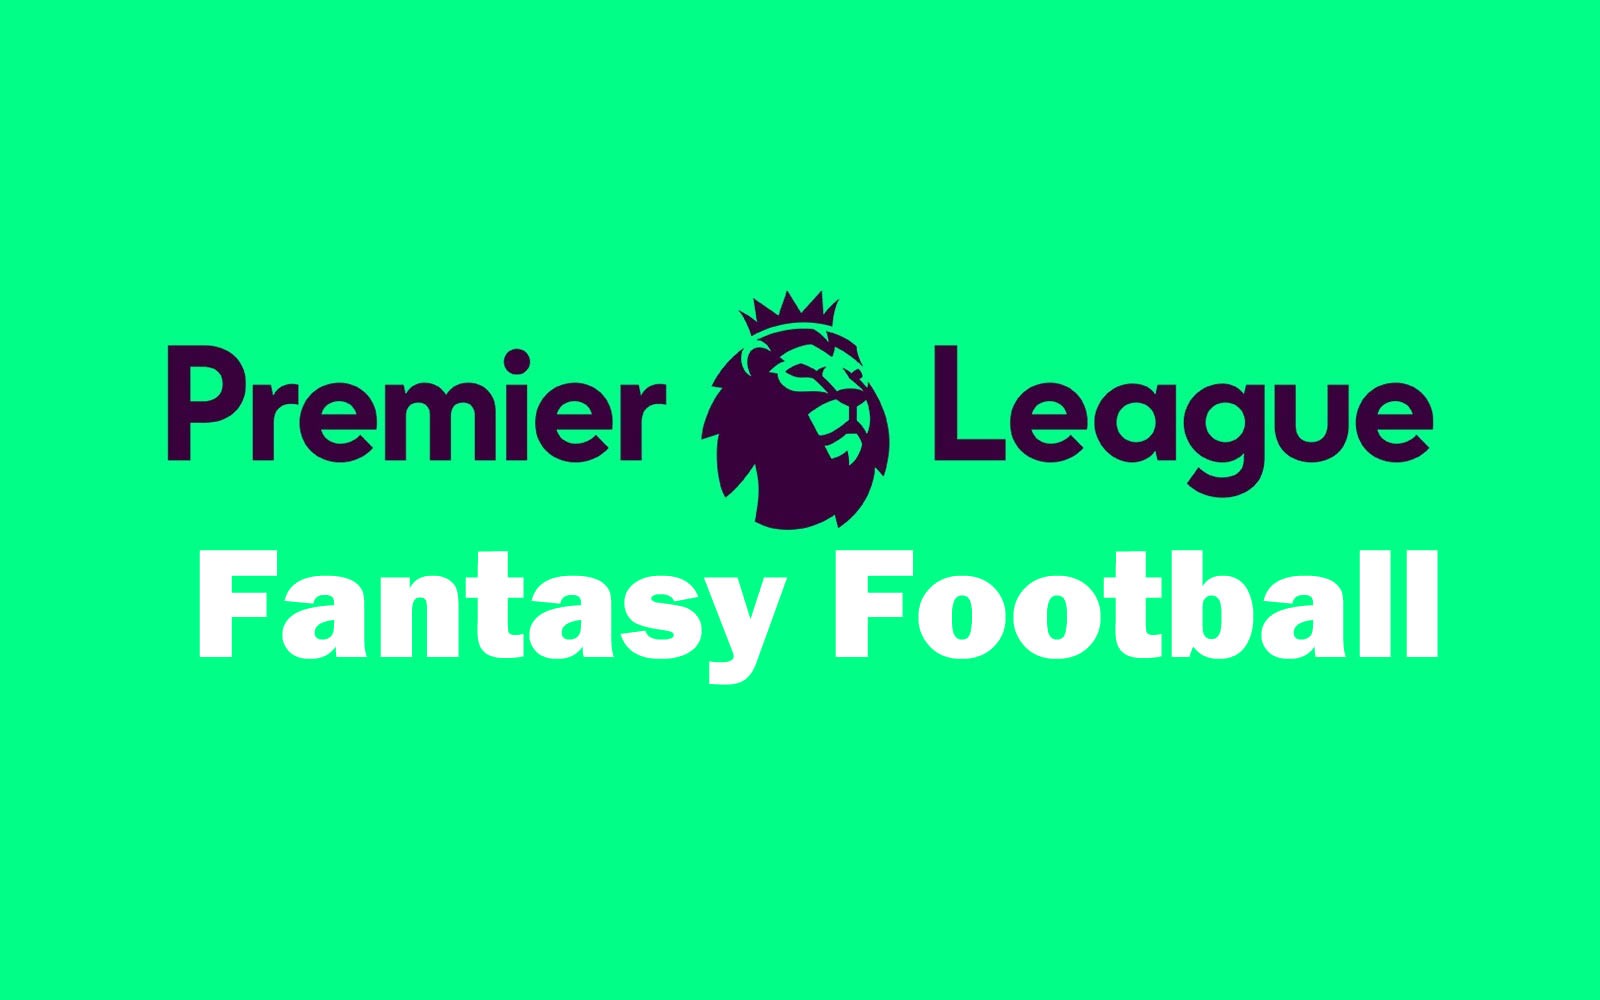 Join up to the Corinthian Fantasy Football League